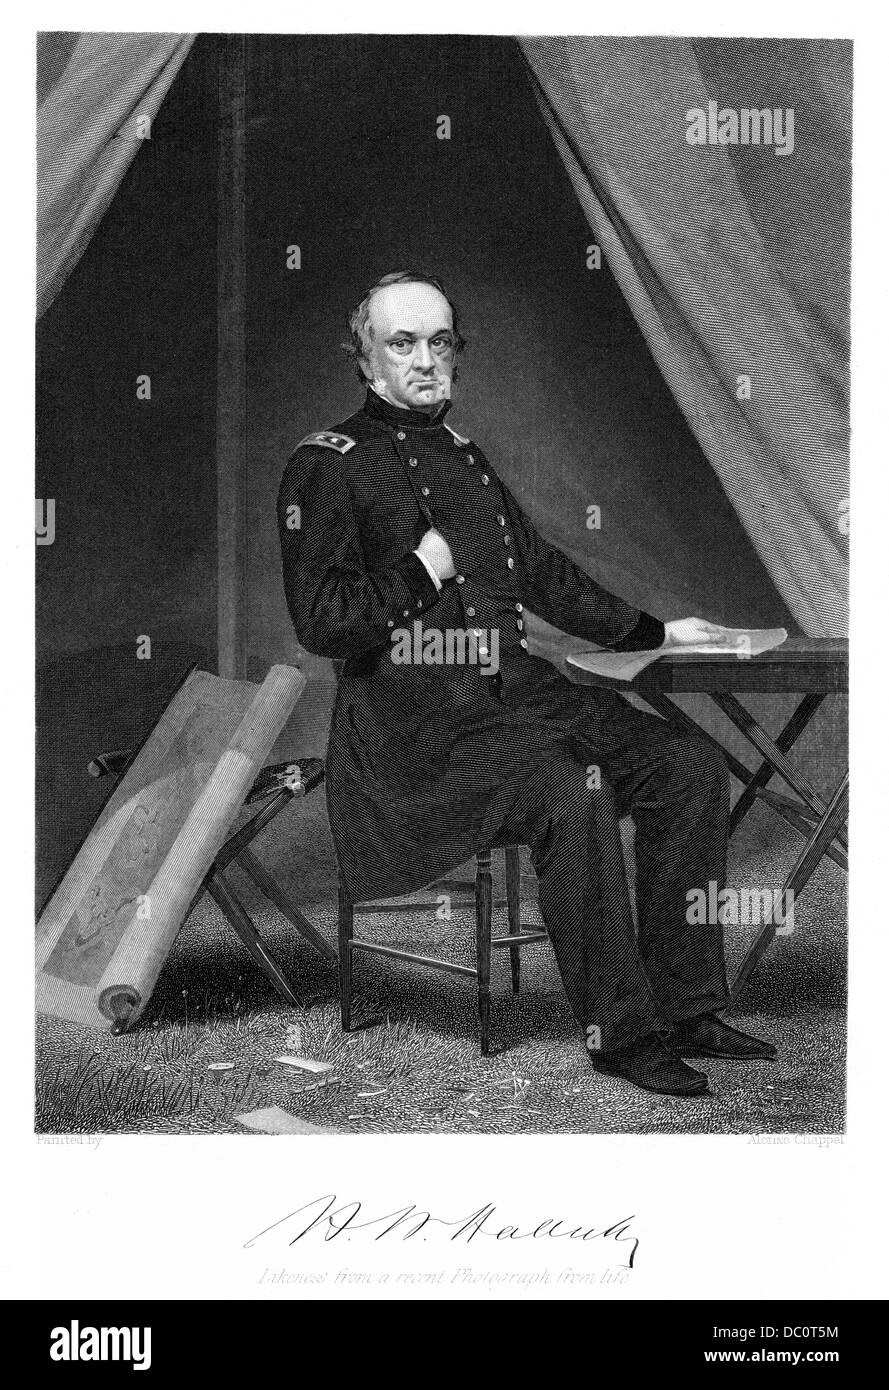 1800s 1860s PORTRAIT OF GENERAL HENRY WAGER HALLECK UNION GENERAL AMERICAN CIVIL WAR Stock Photo